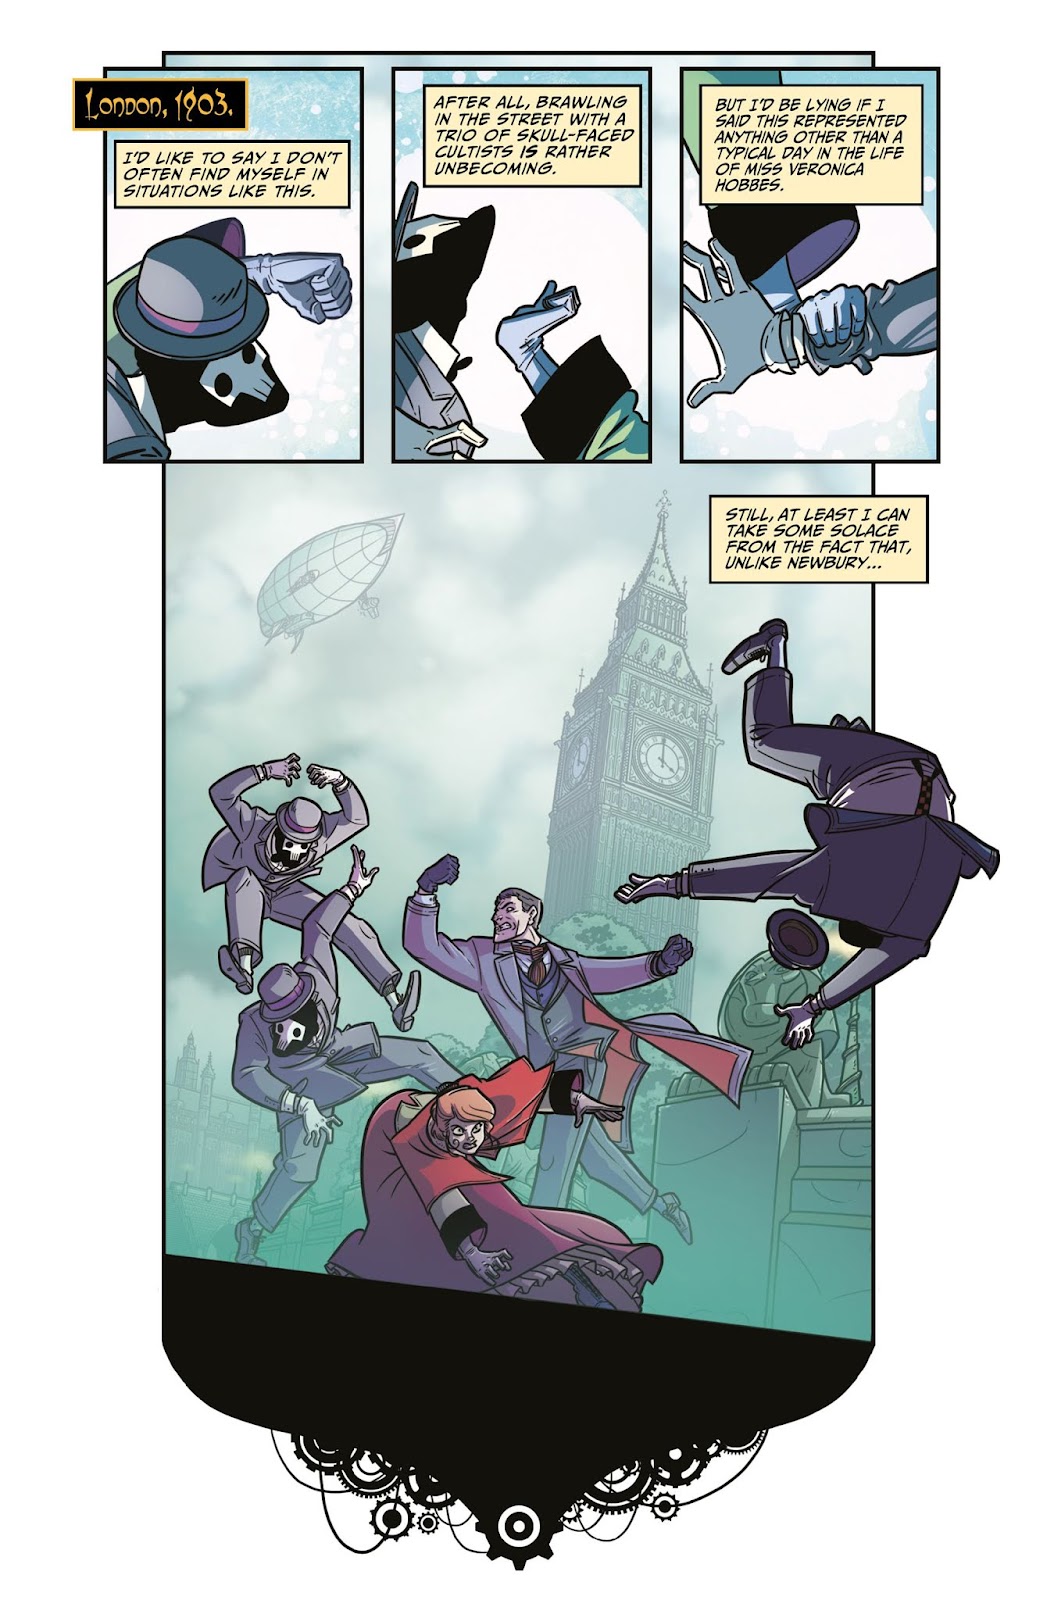 Newbury & Hobbes: The Undying issue 1 - Page 5